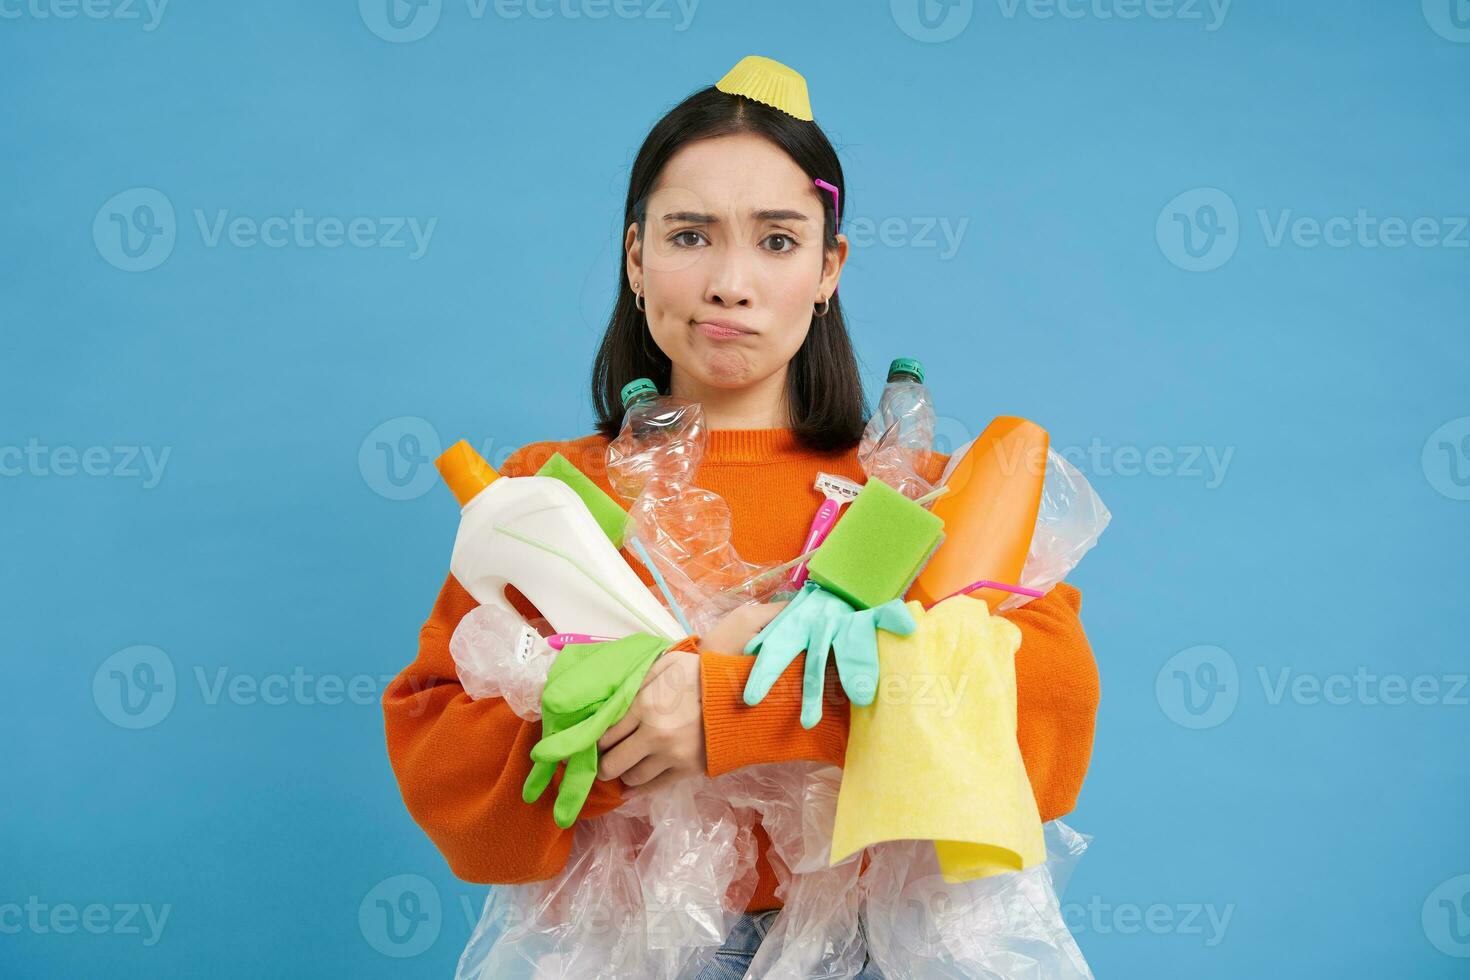 Complicated girl with garbage on her face, plastic empty bottles and waste, looking troubled and sad, blue background photo